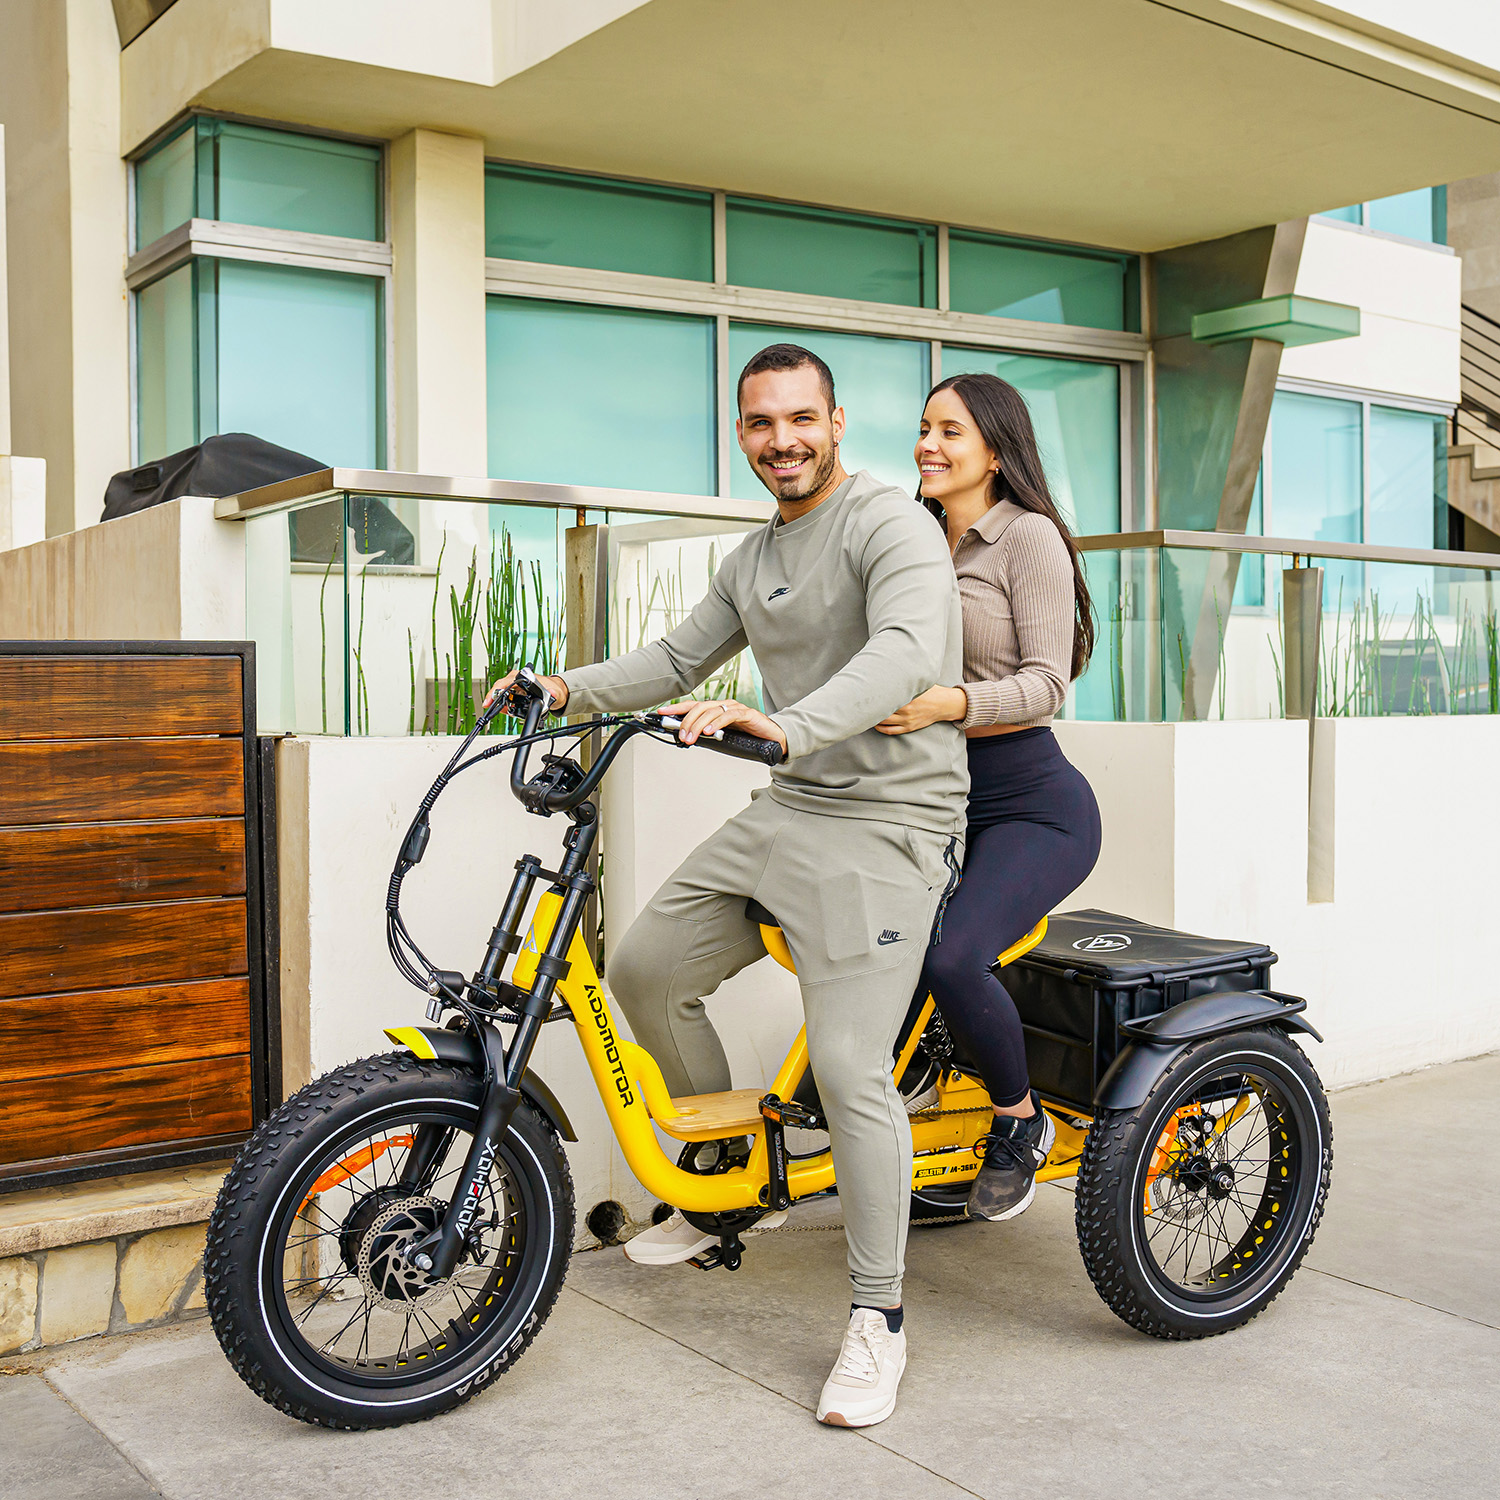 Experience the joy of riding together with the Addmotor Soletri M-366x Electric Tricycle